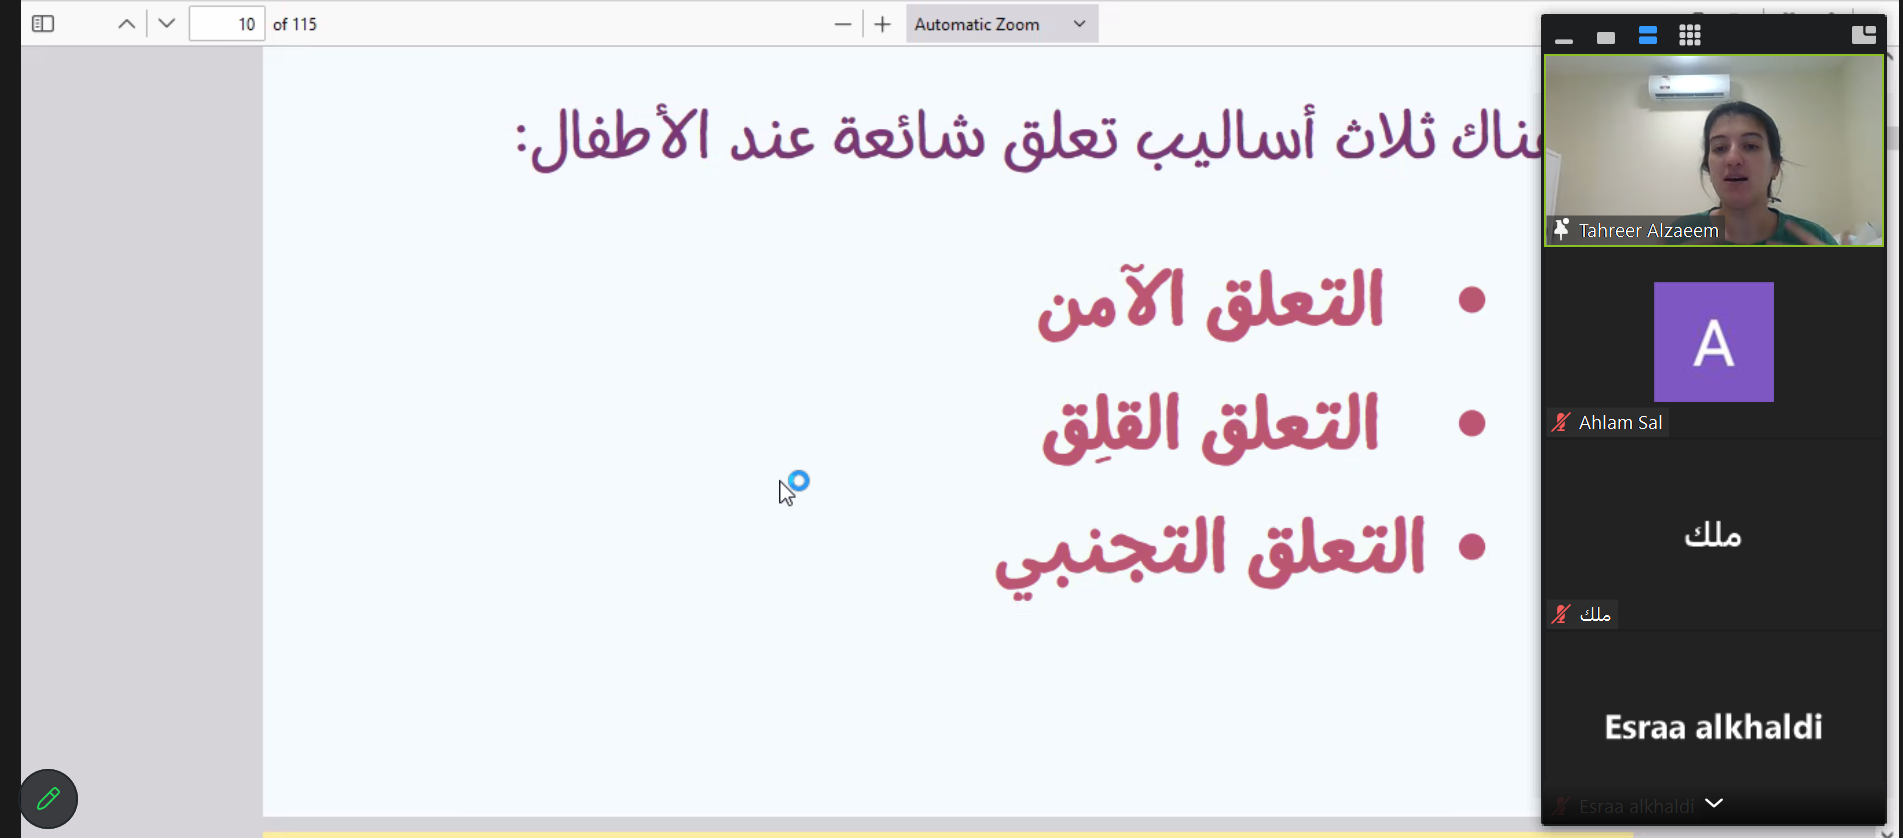 Zoom screenshot with Arabic text and Tahreer in the top right corner